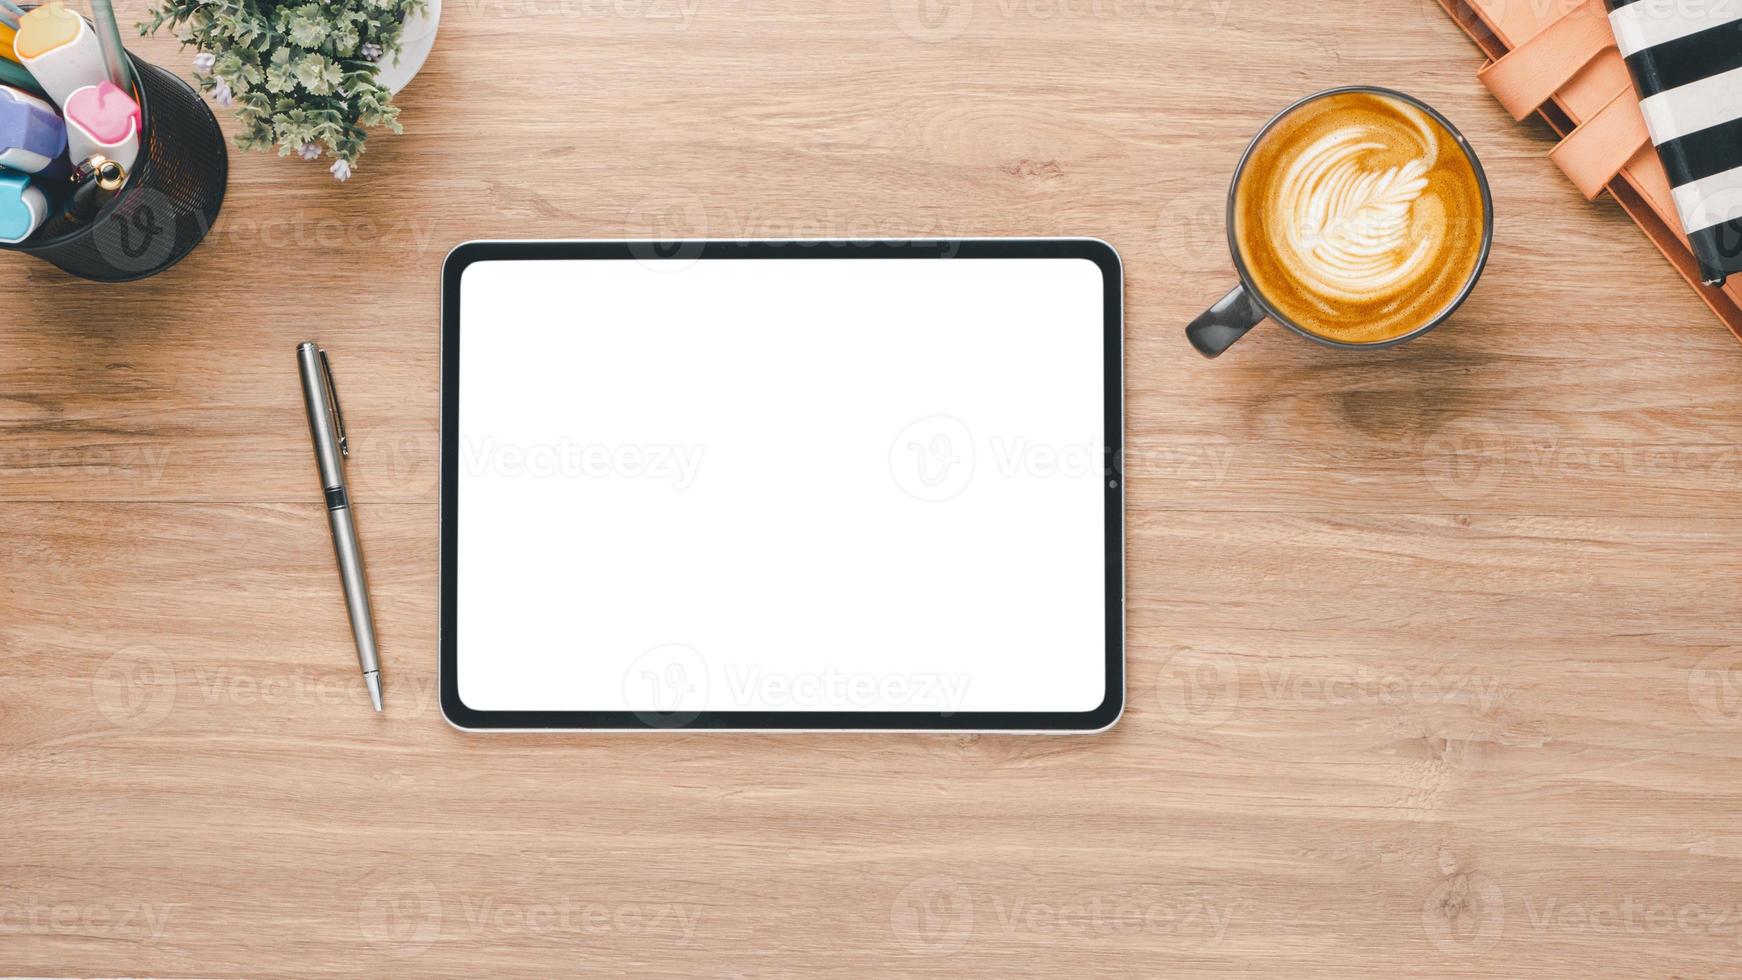 Wooden desk workplace with blank screen tablet, pen, notebook and cup of coffee, Top view with copy space. photo